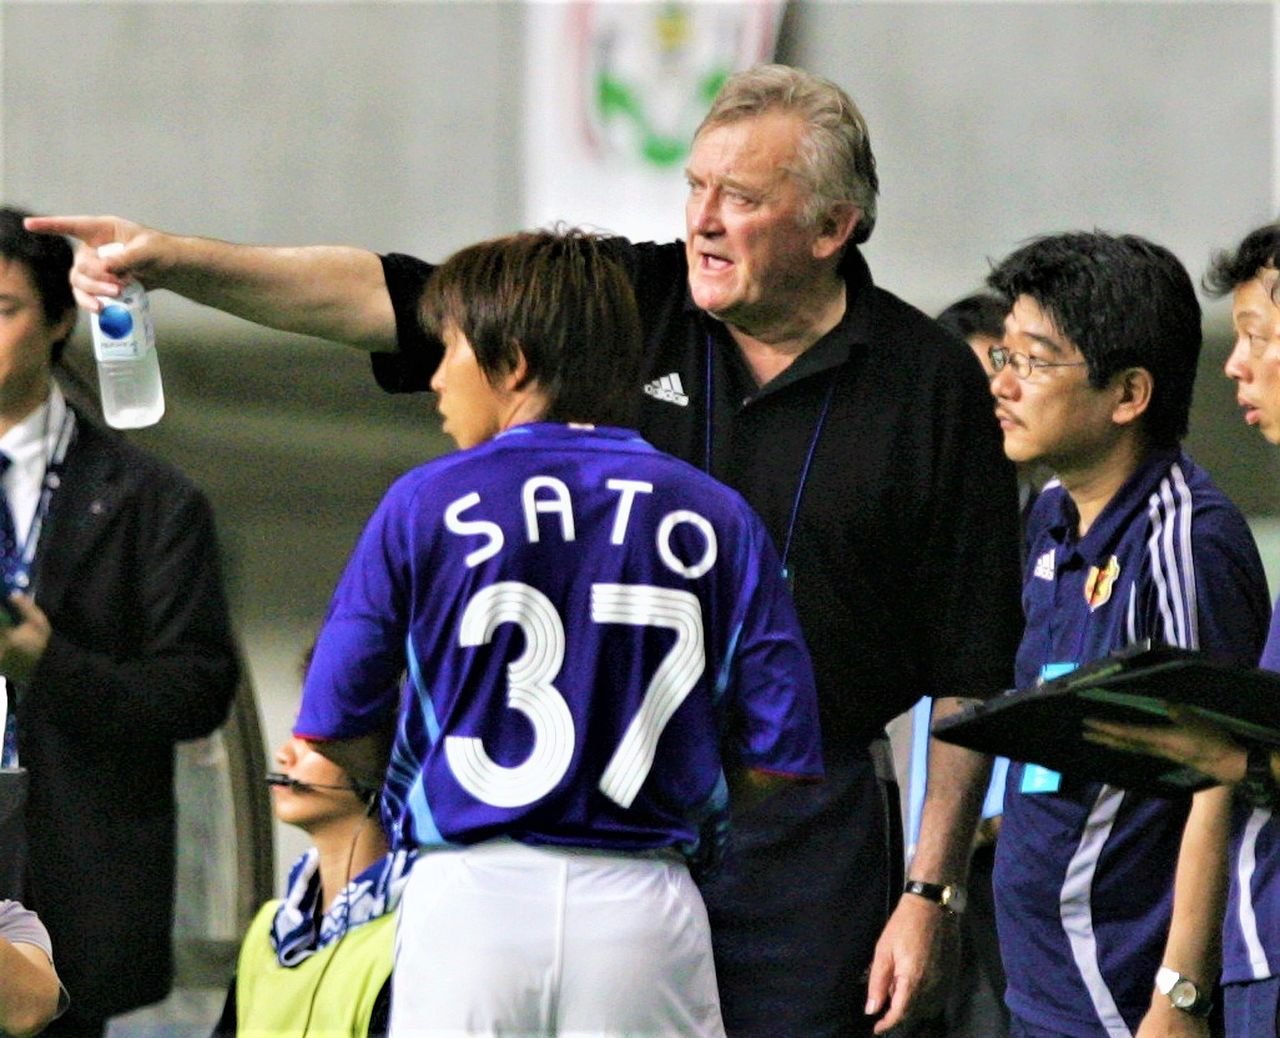 Japan national team manager Ivica Osim, center, gives instructions to forward Satō Hisato during a qualifying match of the Asian Cup at Niigata Stadium on August 16, 2006. (© Jiji)